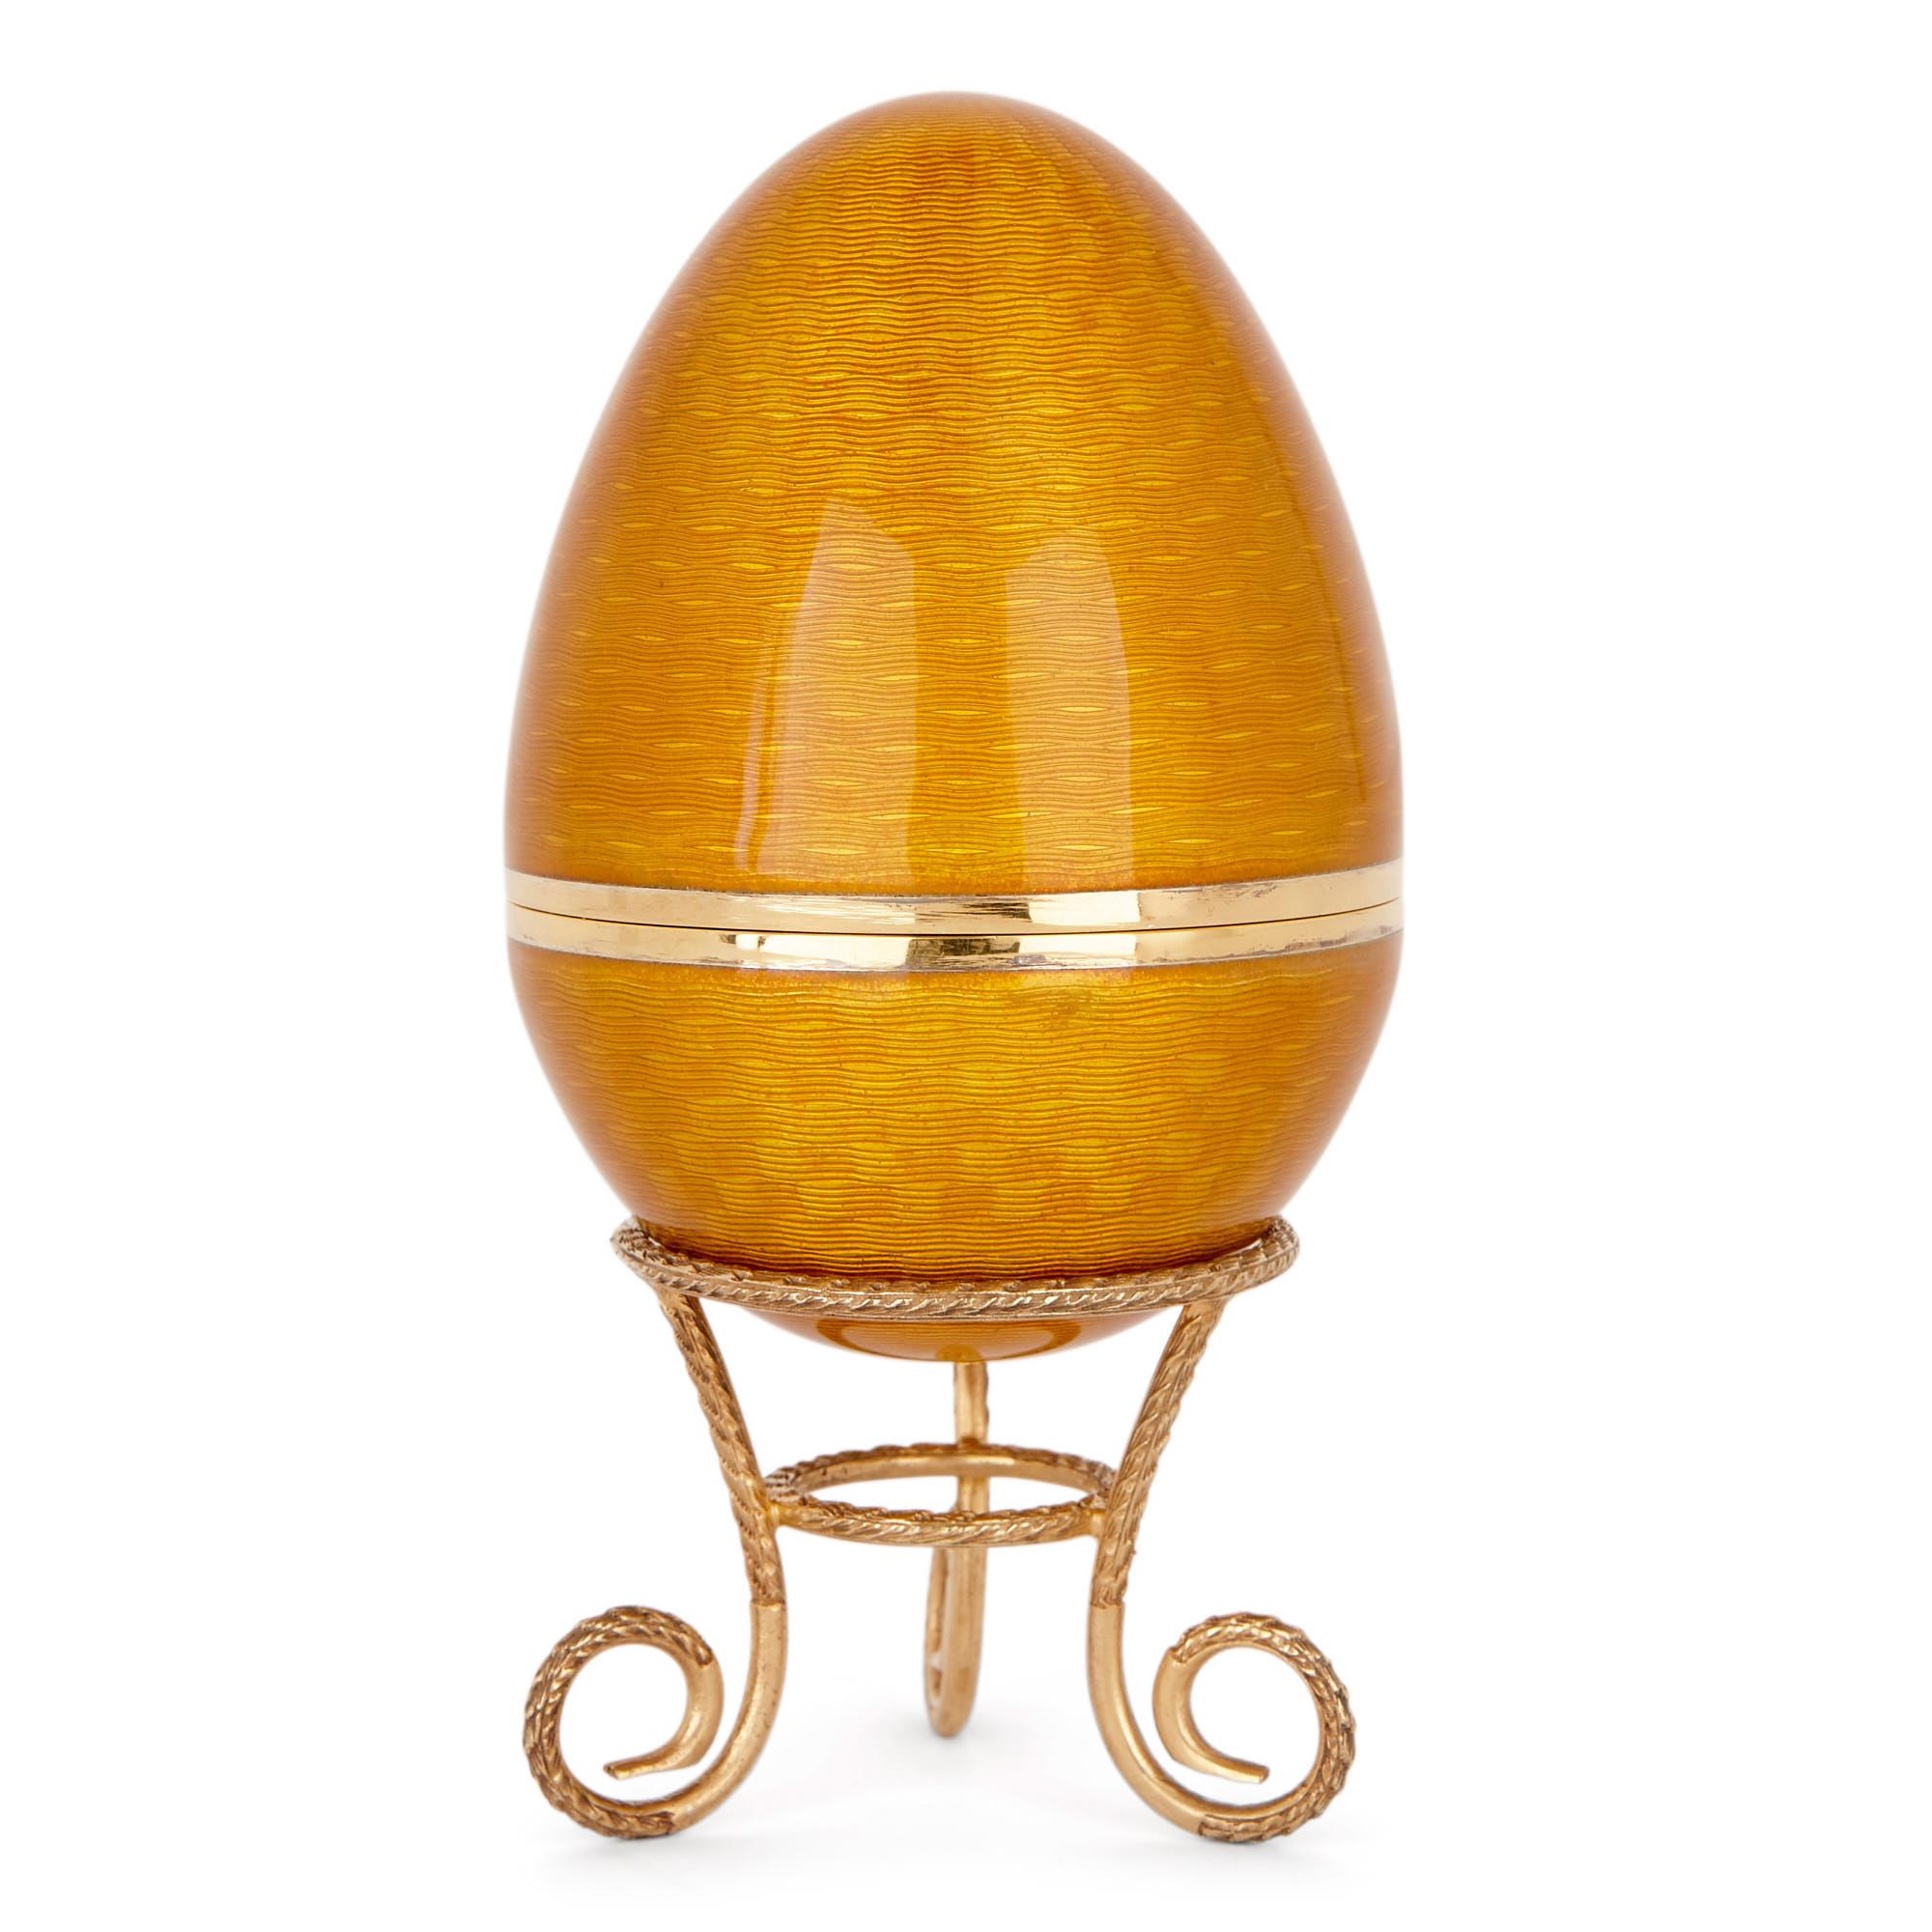 Crafted from a combination of the finest materials, silver (mostly gilded) and guilloche enamel, these eggs are highly precious and collectable items.

The collection includes two large eggs (one emerald green and one orange), two medium-sized